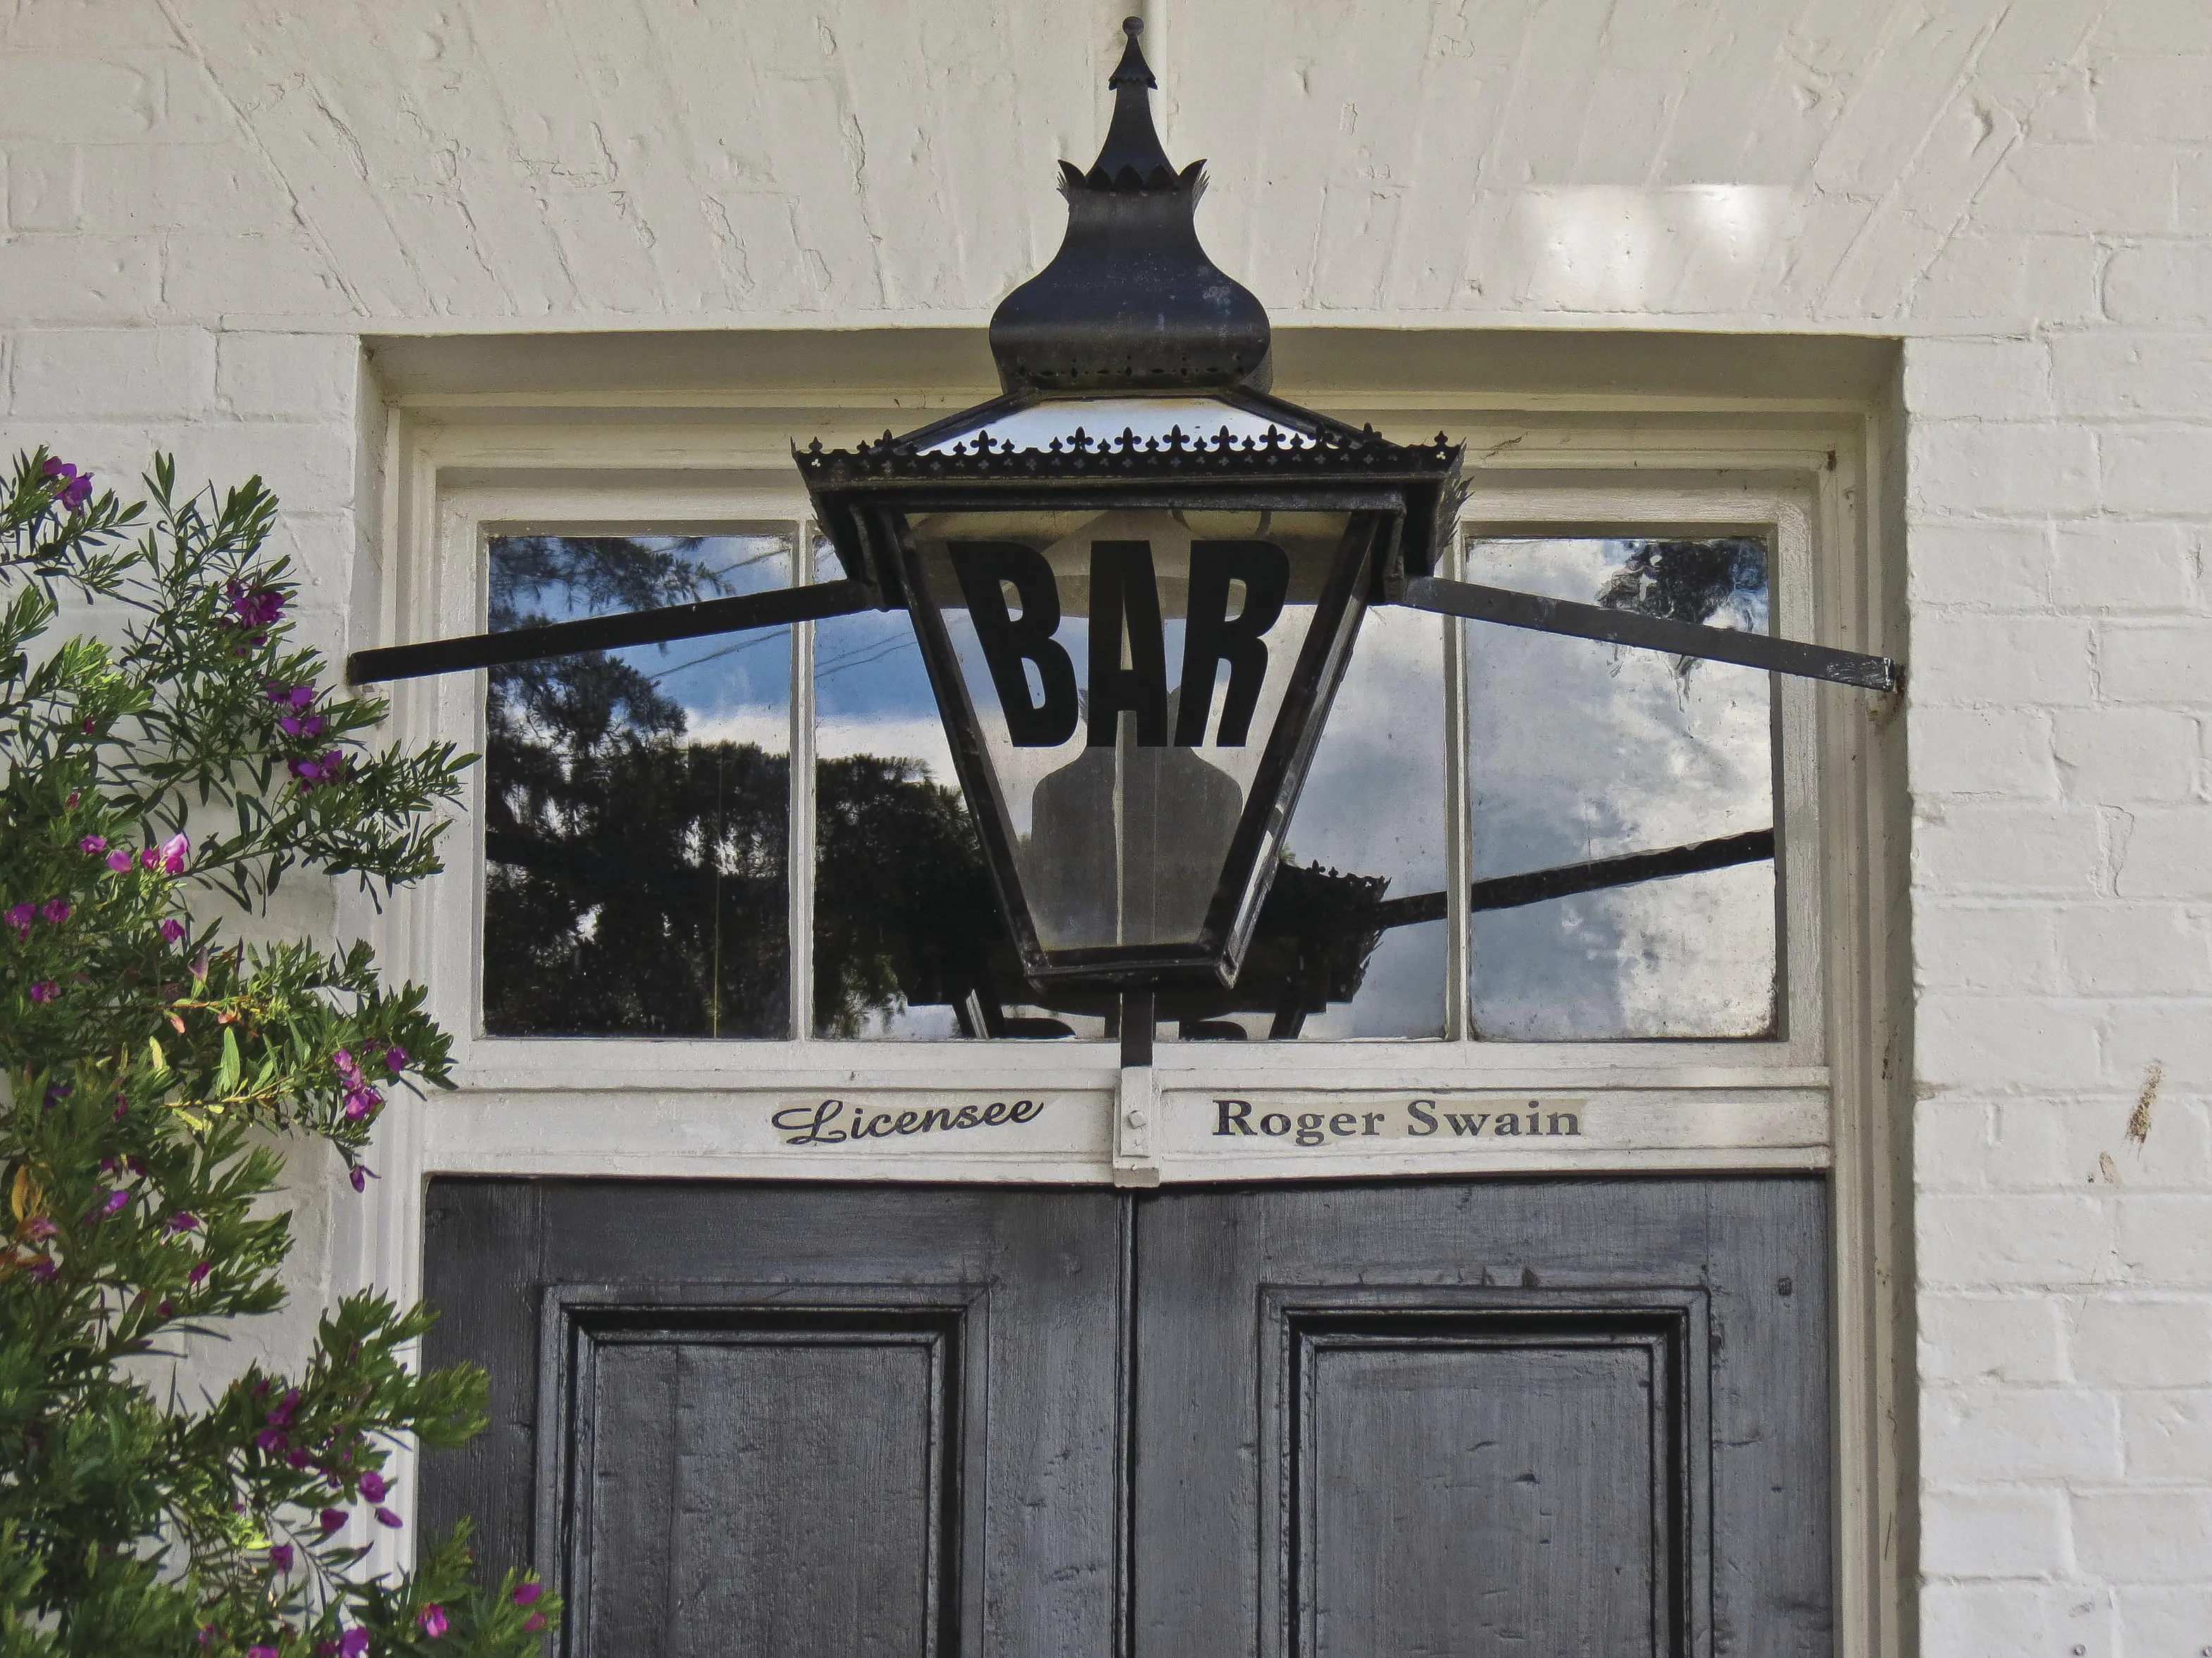 Bar is written on a lamp outside The Fitzpatrick's Inn. The following writing is also on the door 'licensee - Roger Swain'.